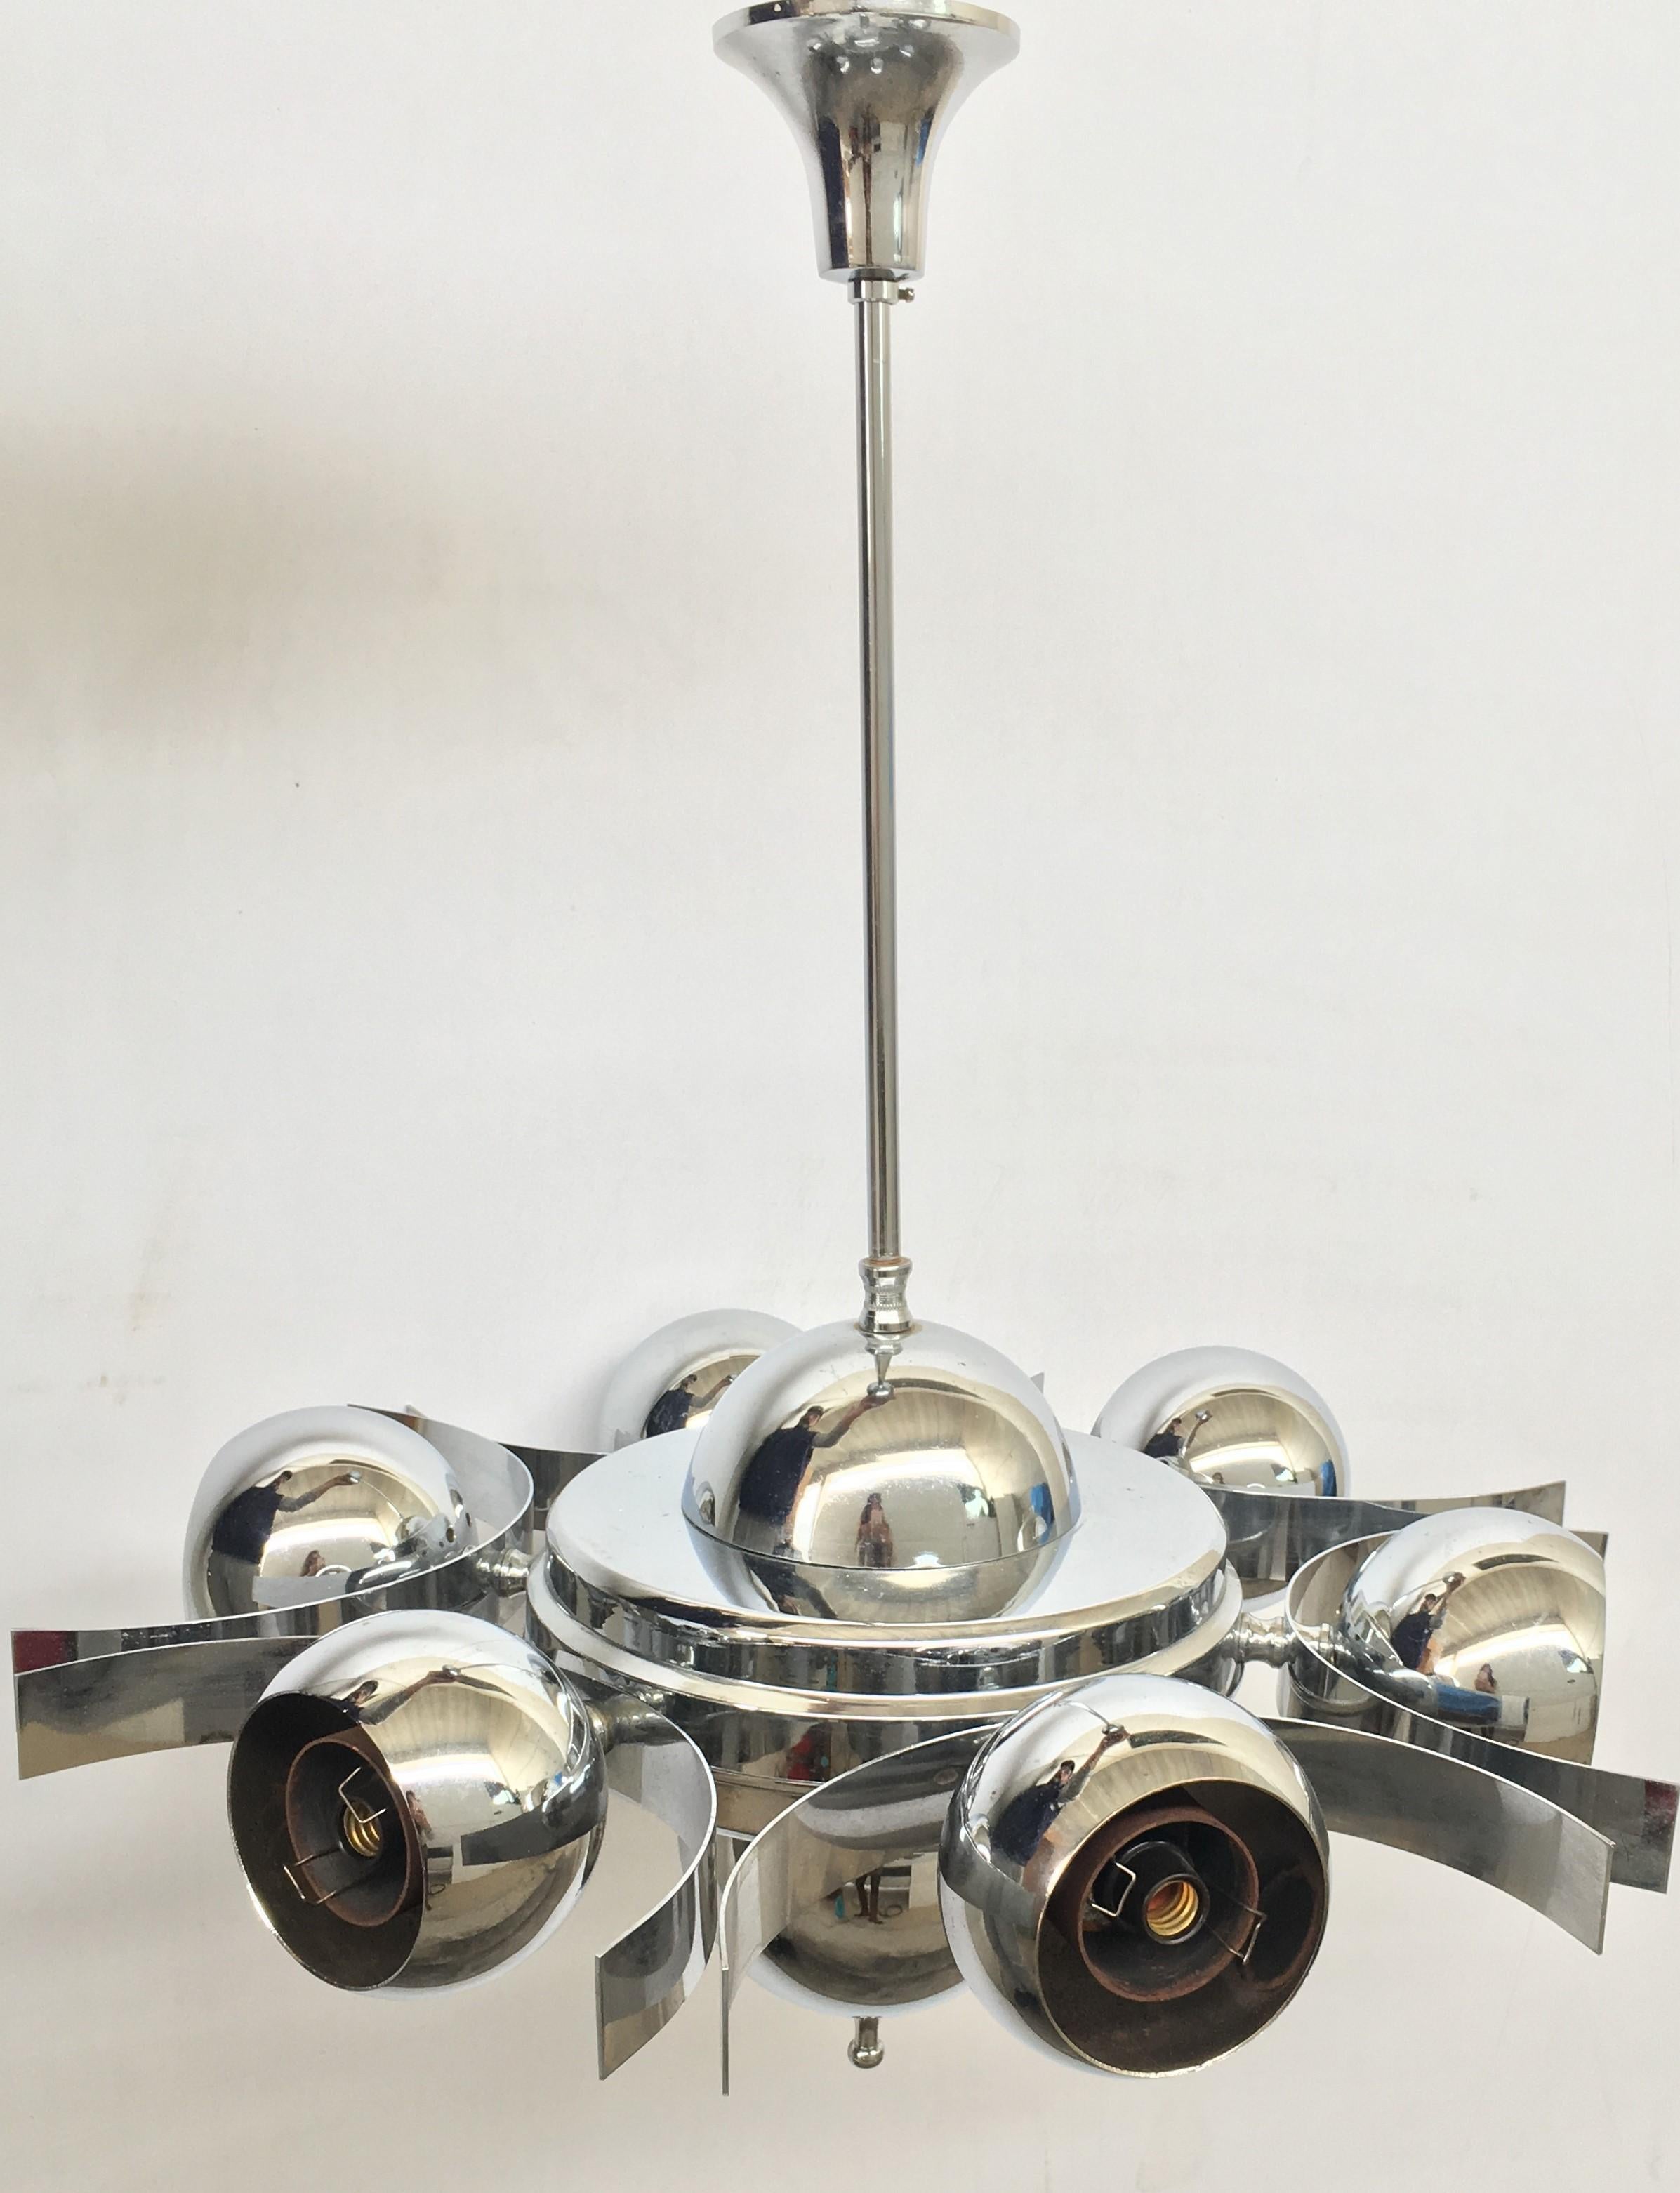 Italian Pop Art Space Age Chrome Ceiling Lamp with Six Balls, 1960s For Sale 1